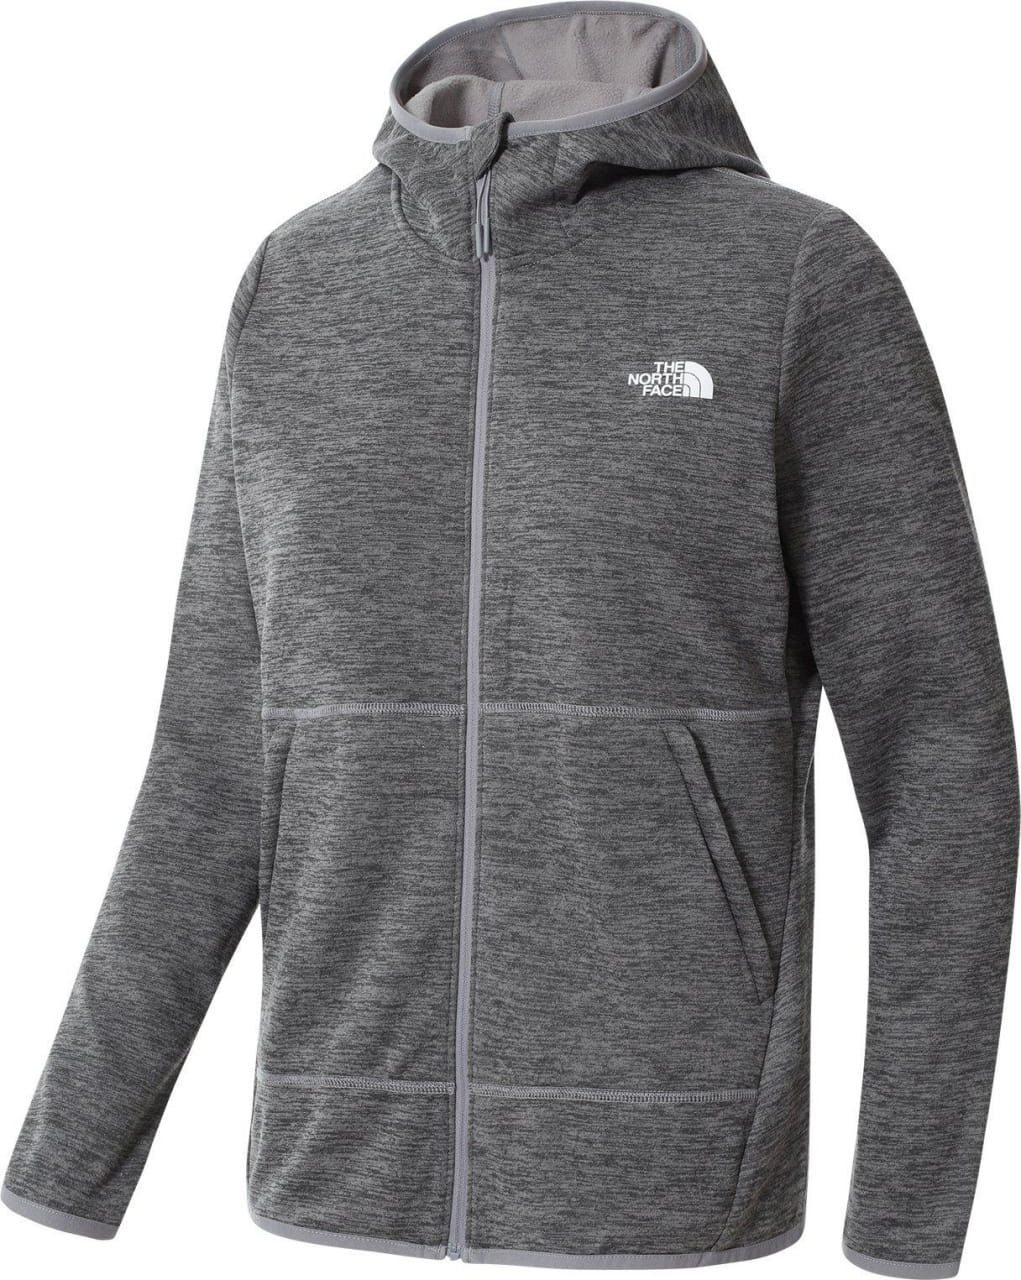 Dámská mikina The North Face Women´s Canyonlands Hoodie